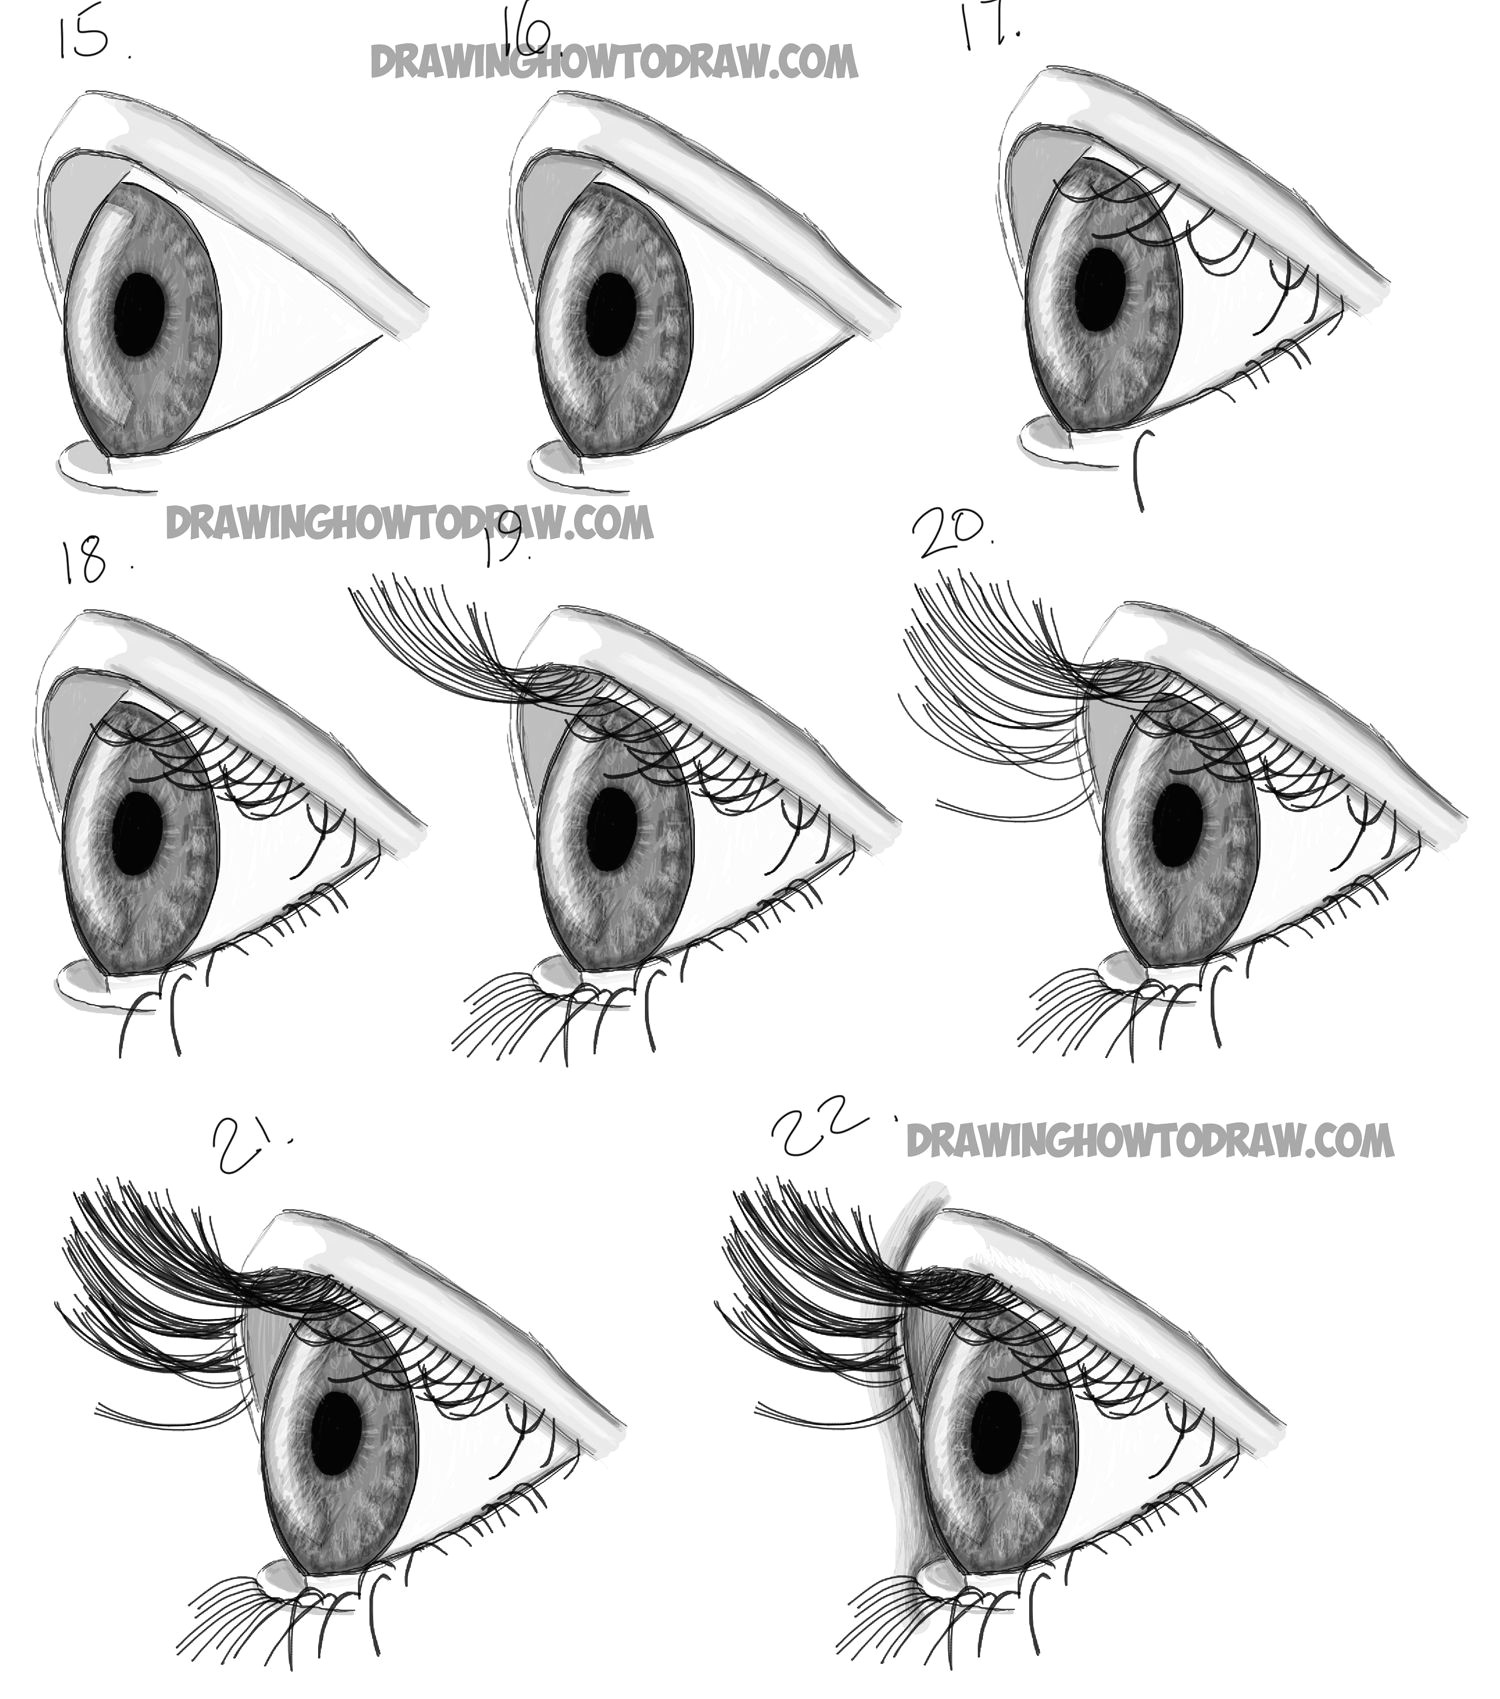 Drawing Eyes In Profile How to Draw Realistic Eyes From the Side Profile View Step by Step